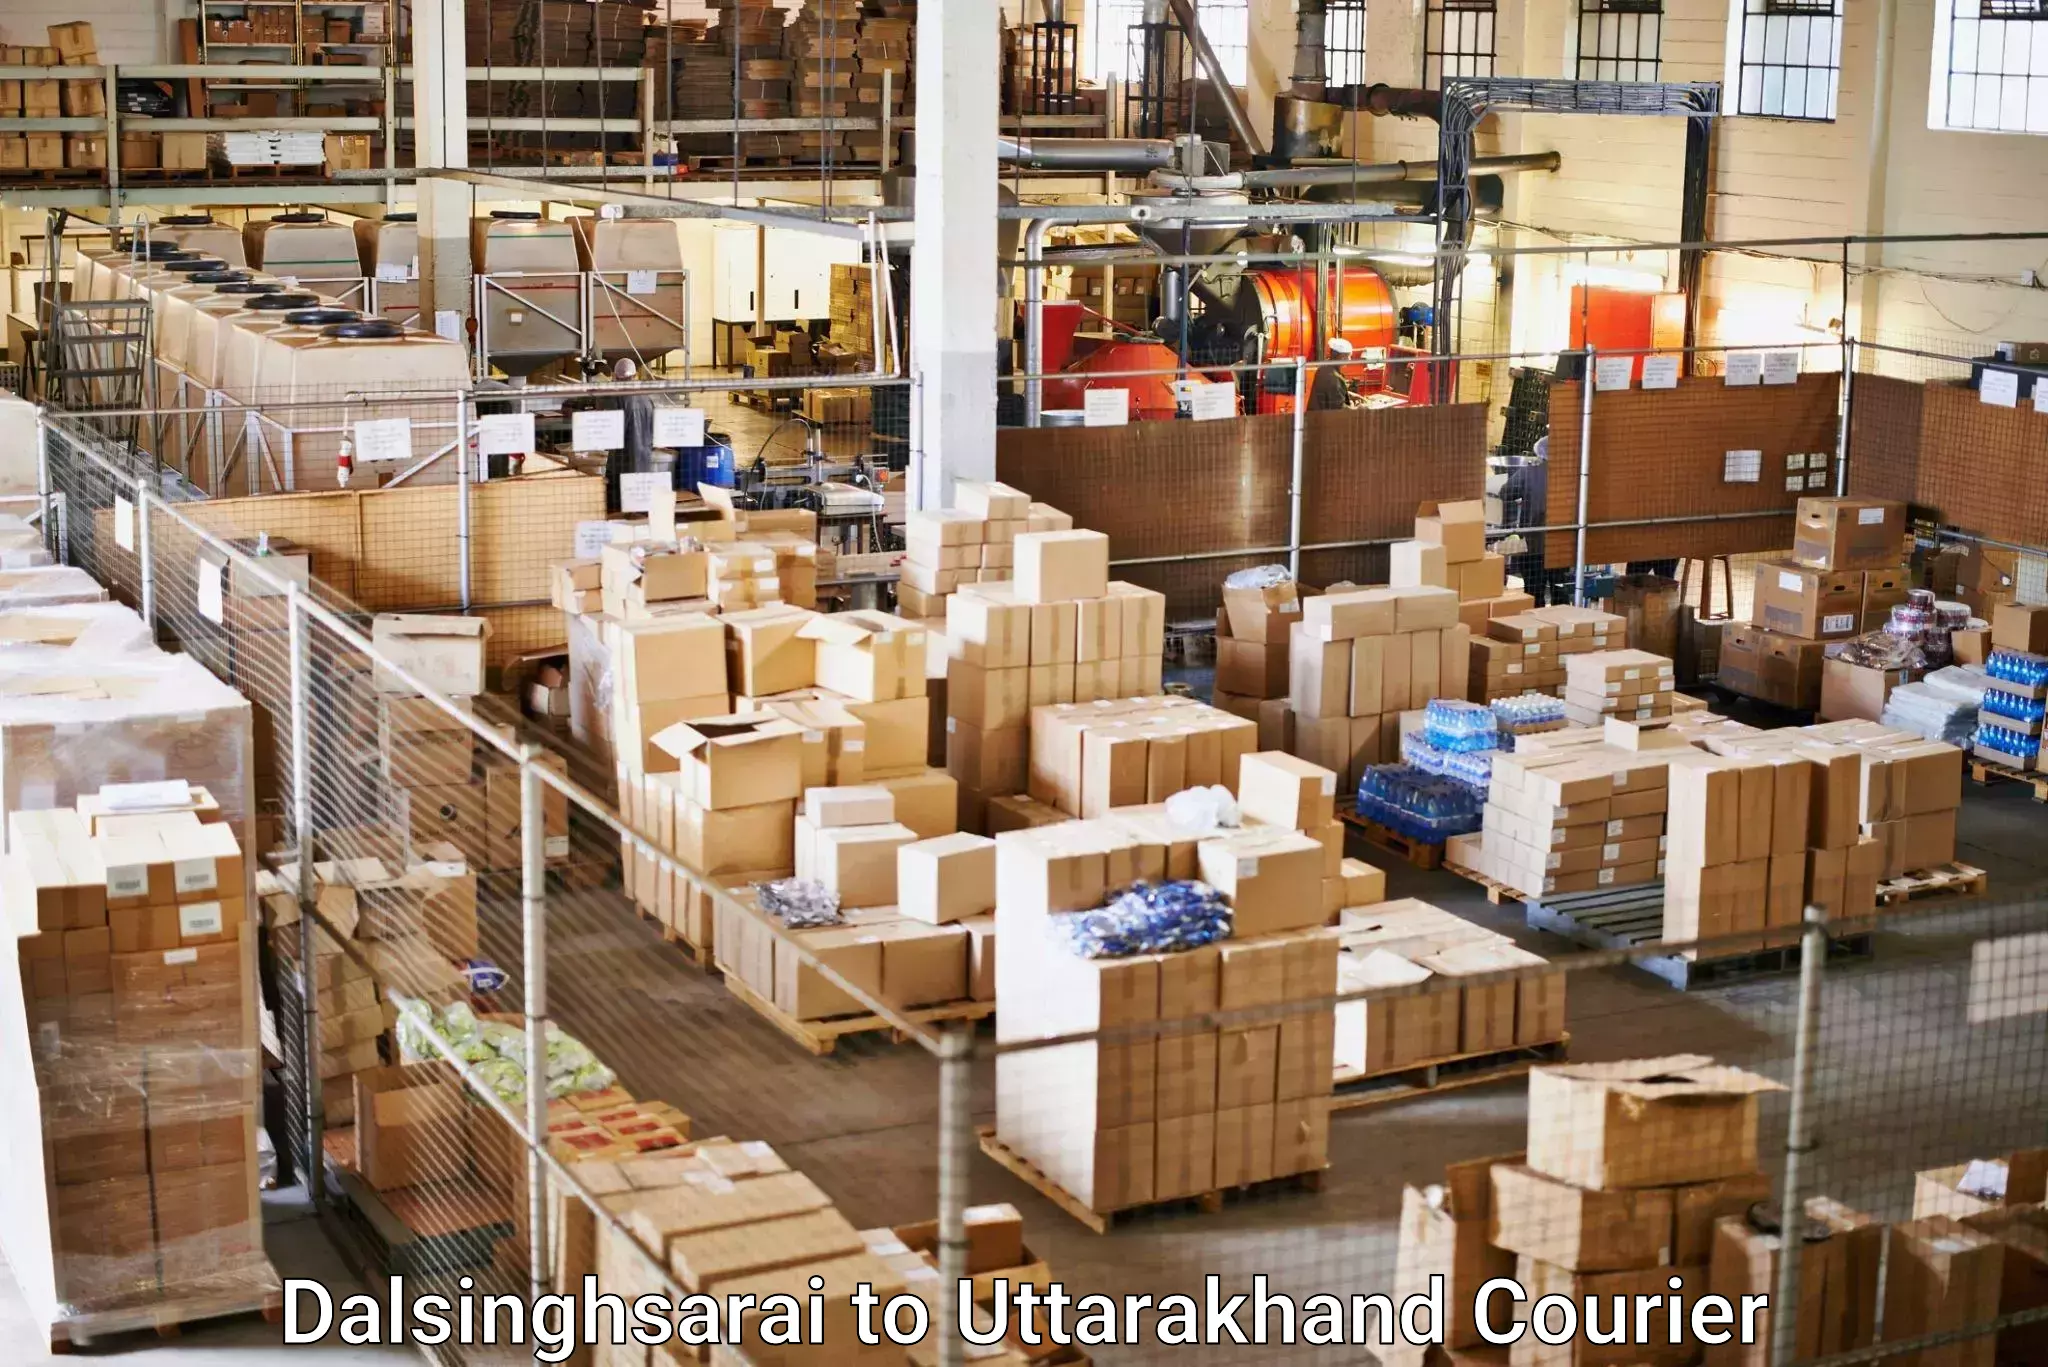 Comprehensive shipping network in Dalsinghsarai to Ranikhet